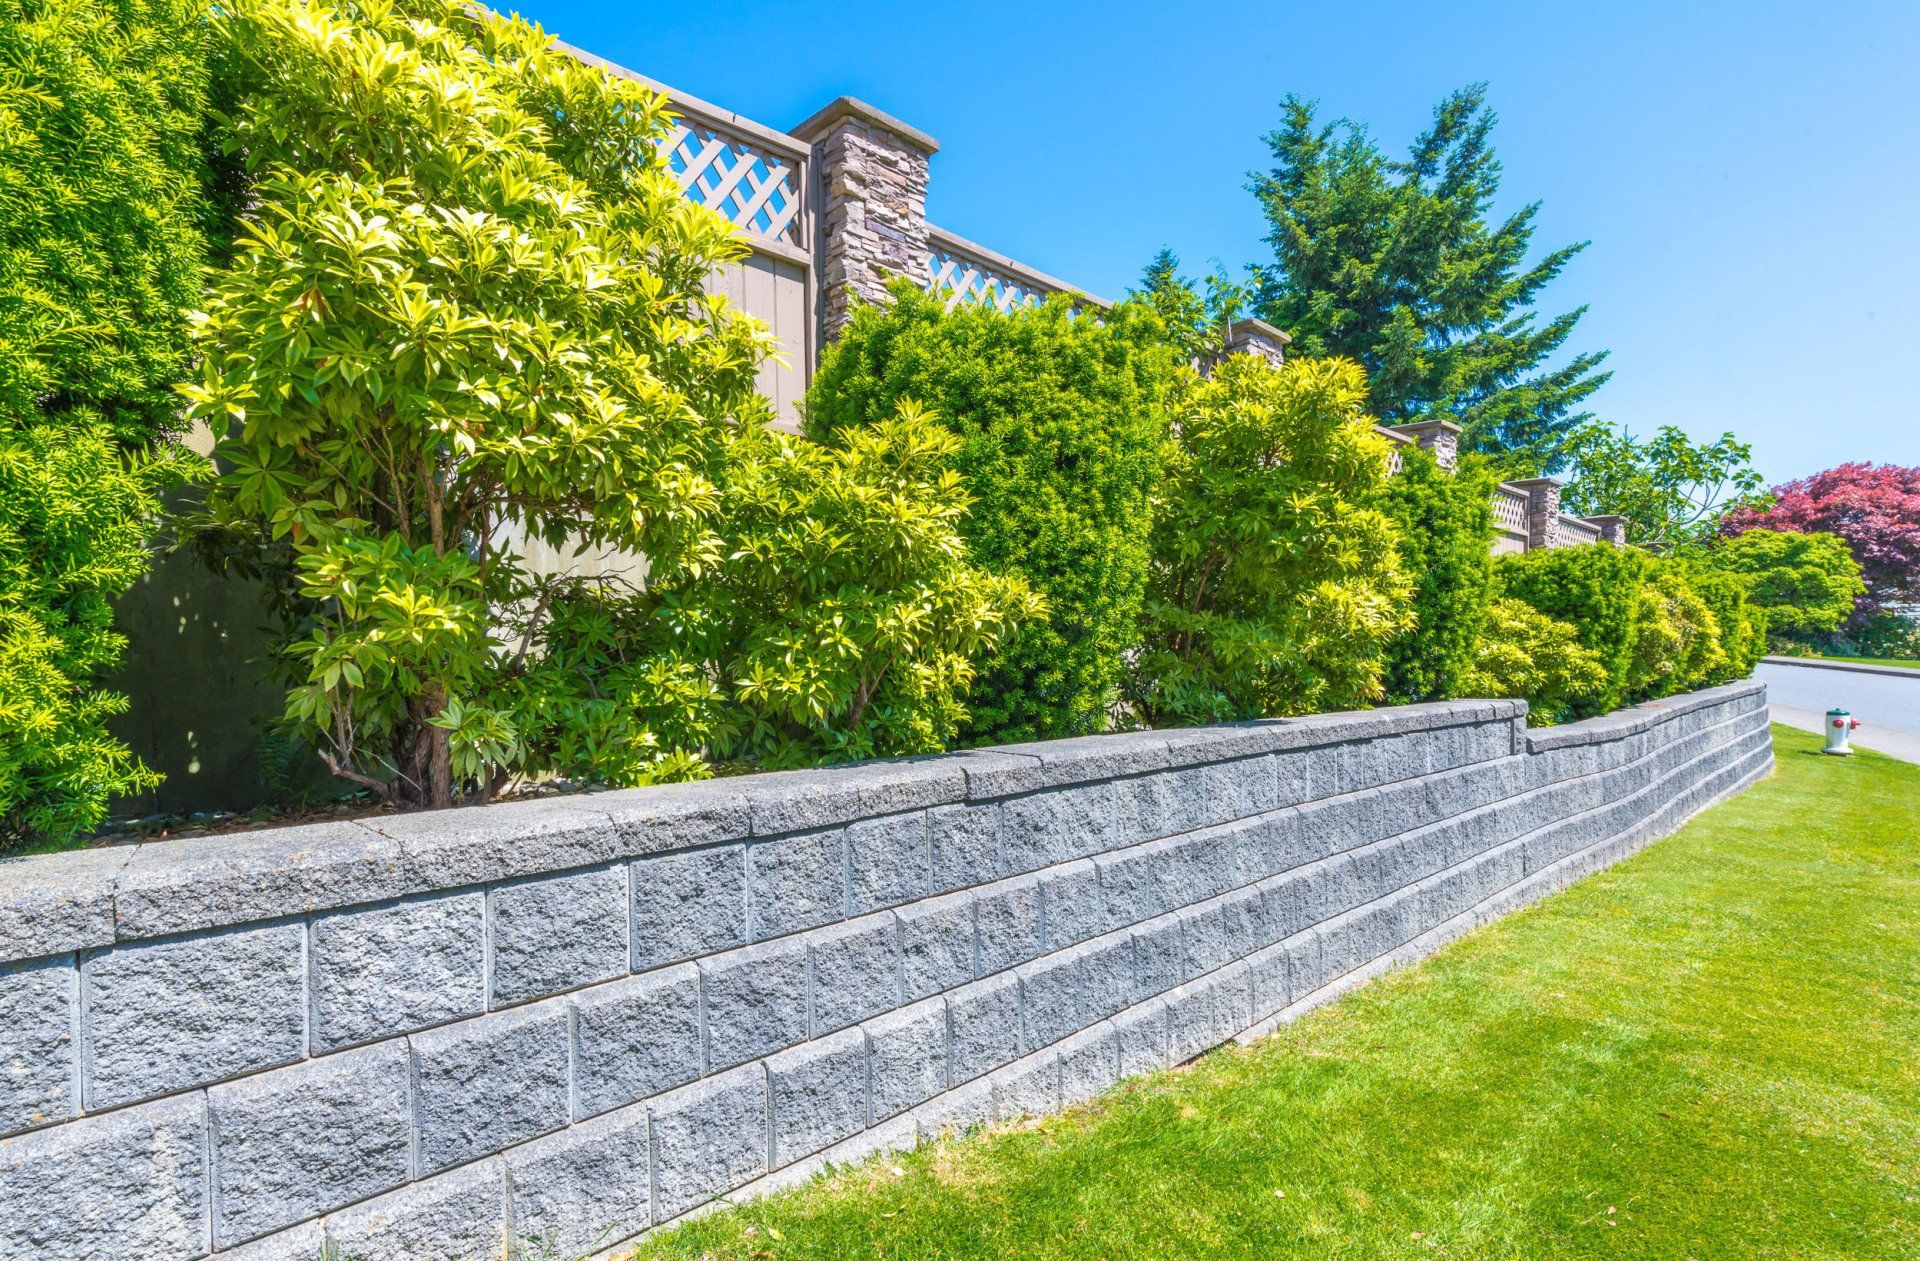 Newly constructed retaining wall with shrubs